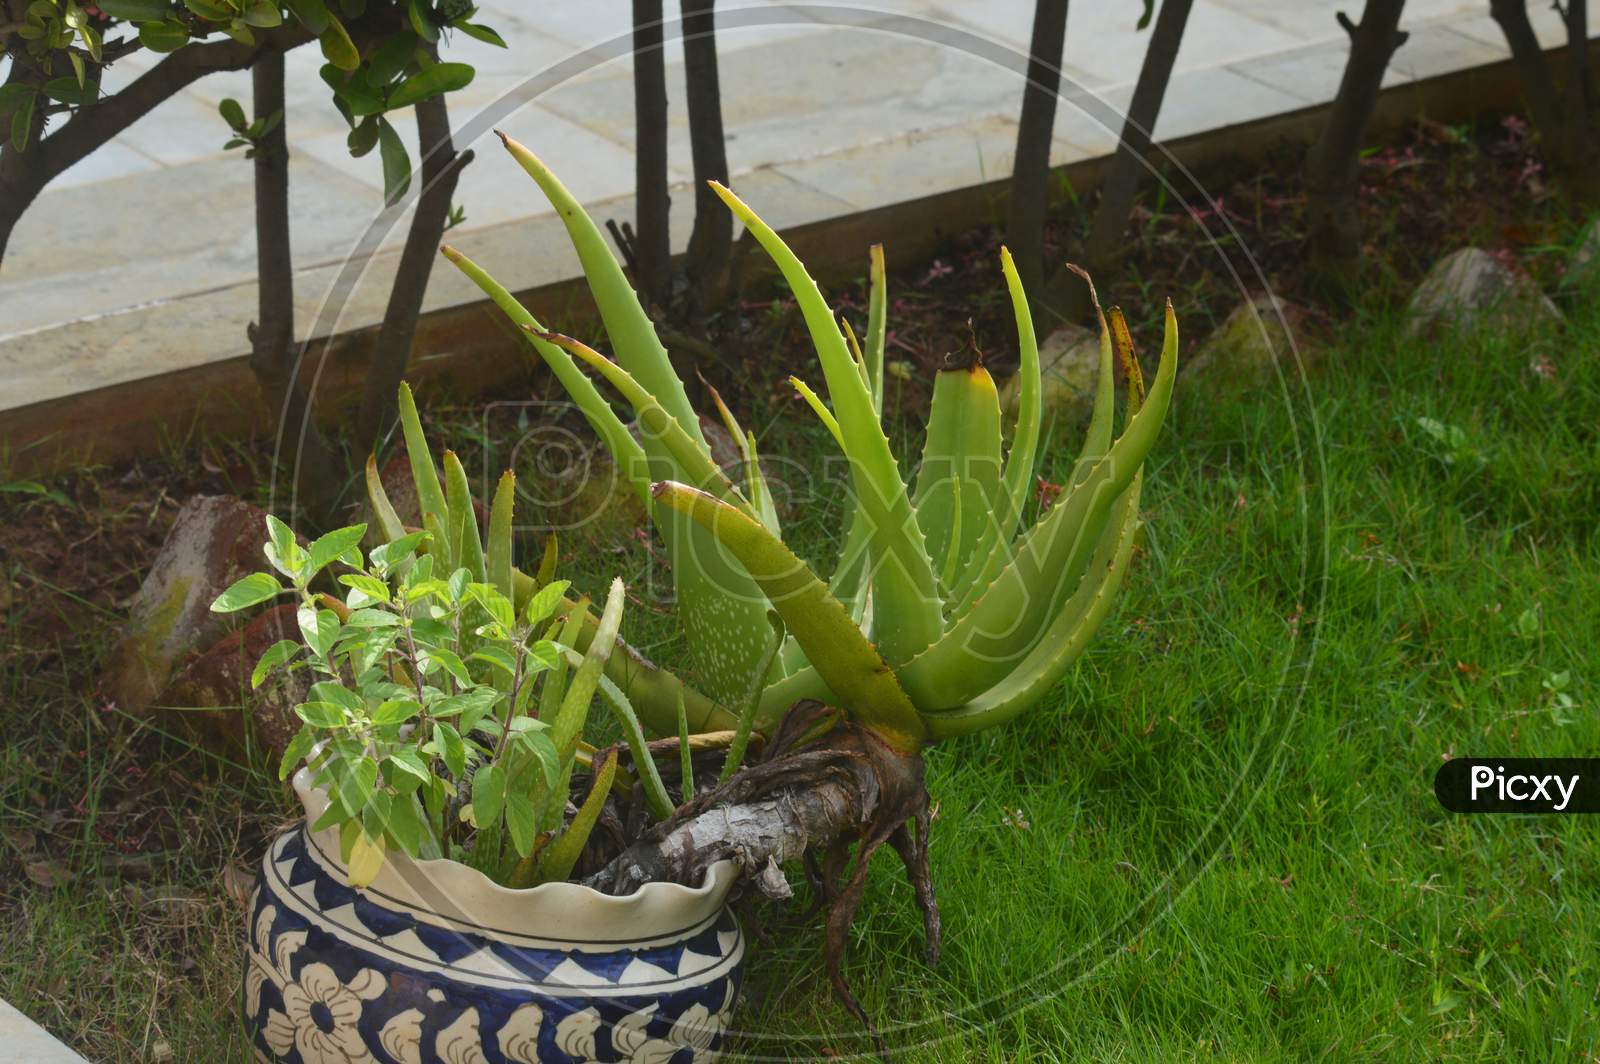 Aloe vera plant in a pot in a garden outside Indian home